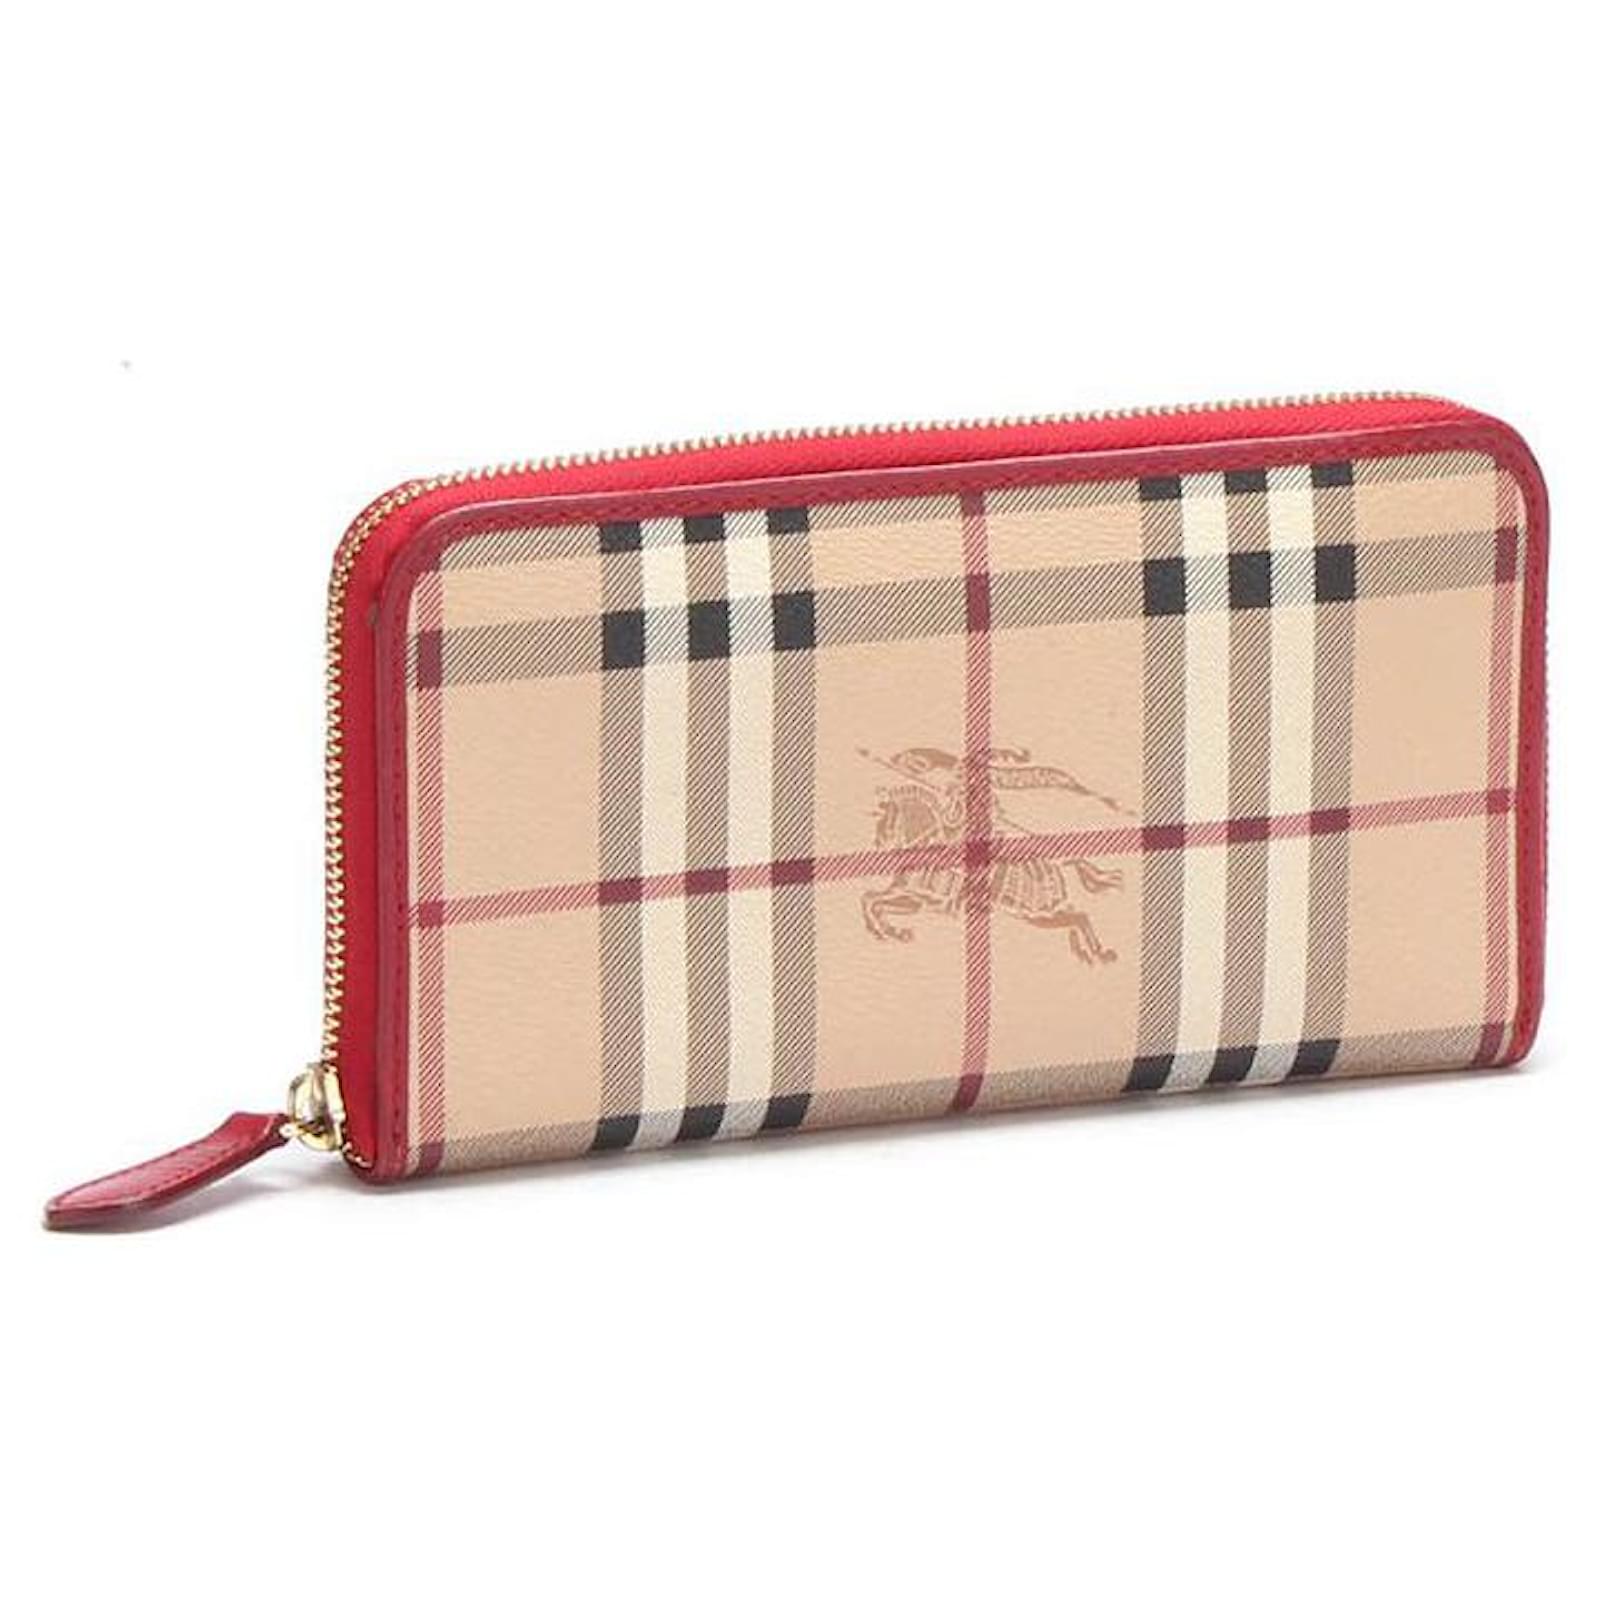 burberry wallet red